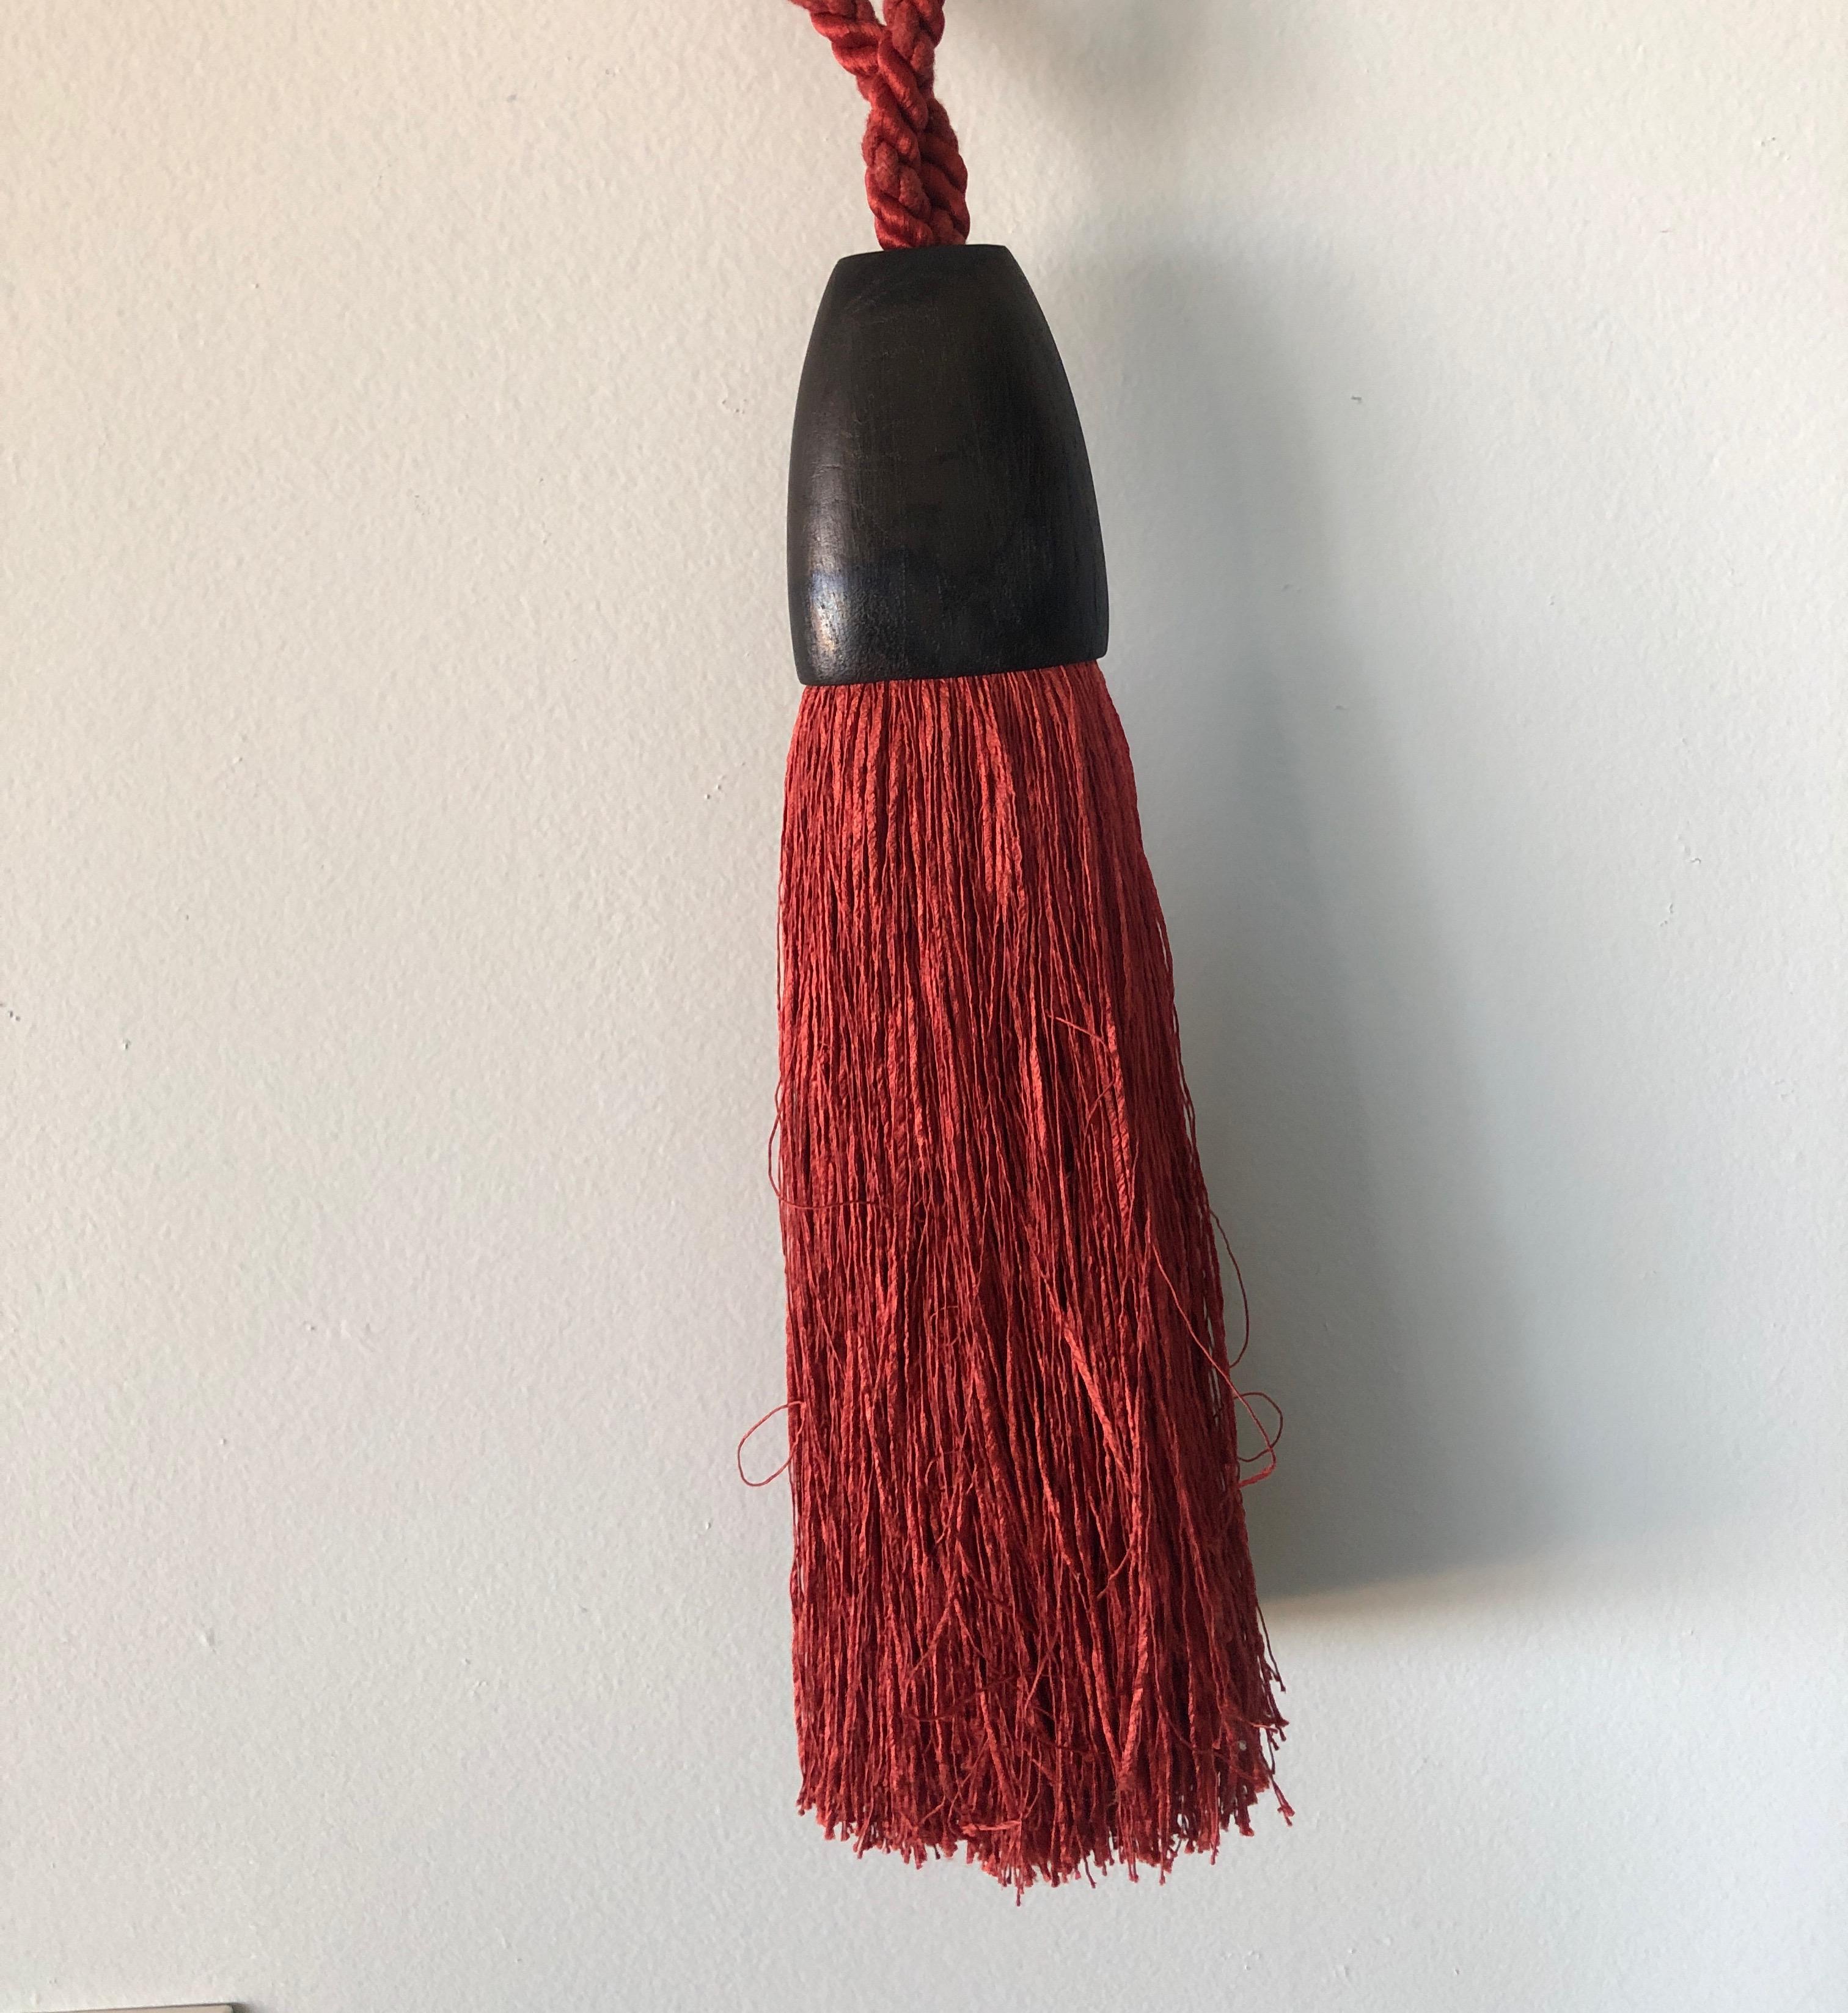 Red and black Houles Paris curtain tassel tieback.
New with tags.
Size:35 L x 3 W.